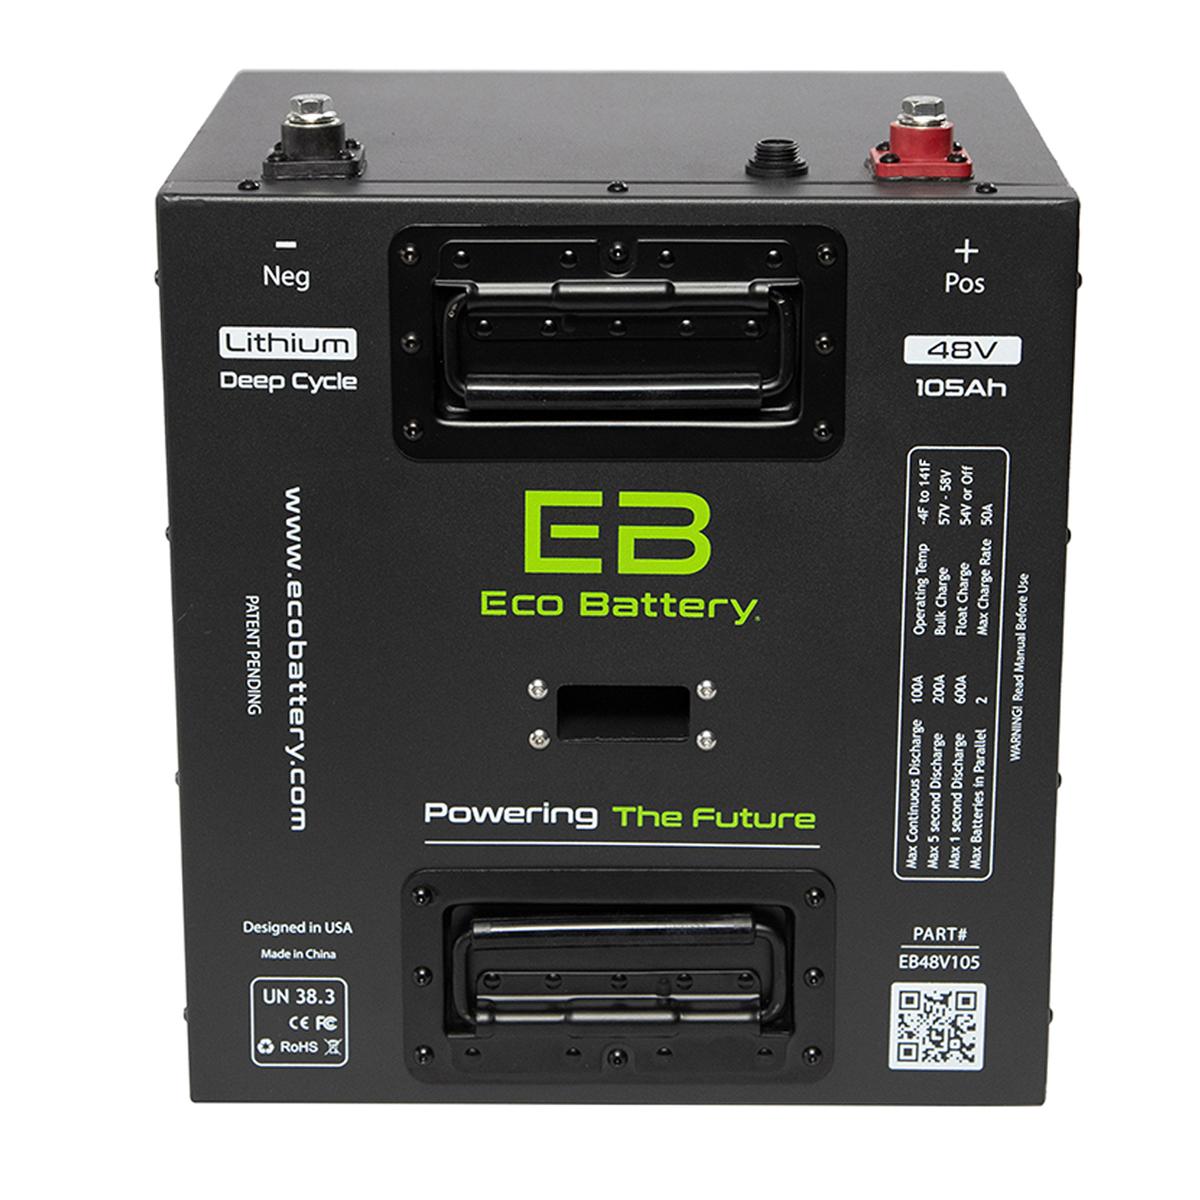 51V 105AH Eco LifePo4 Lithium Battery Kit with 15A Charger – Thru Hole Style Battery